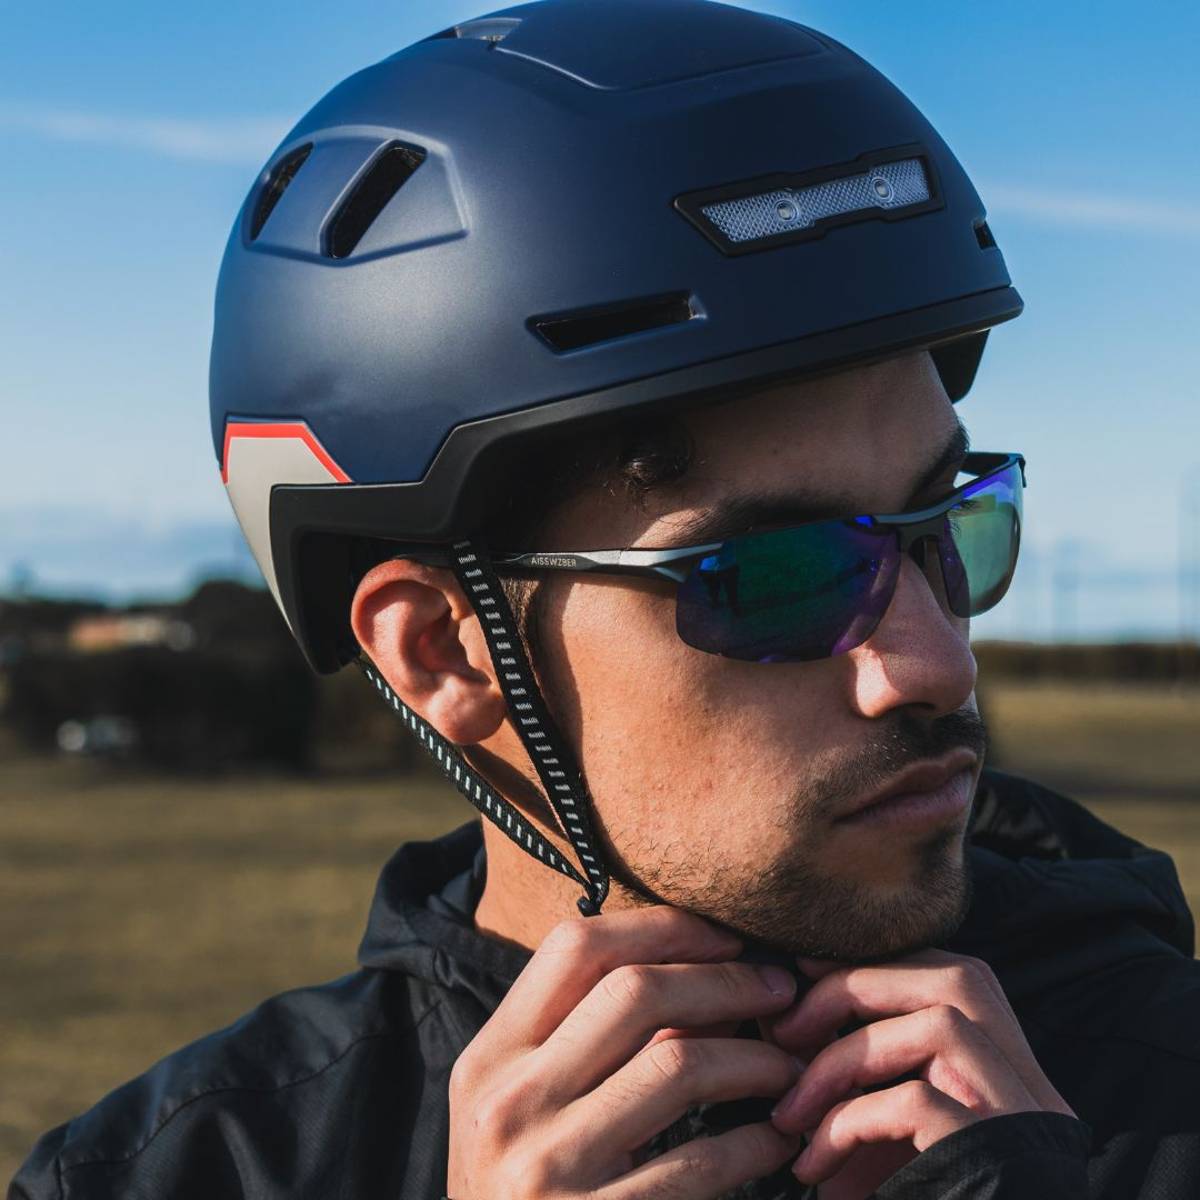 man clipping fidlock strap on xnito ebike helmet and looking really serious